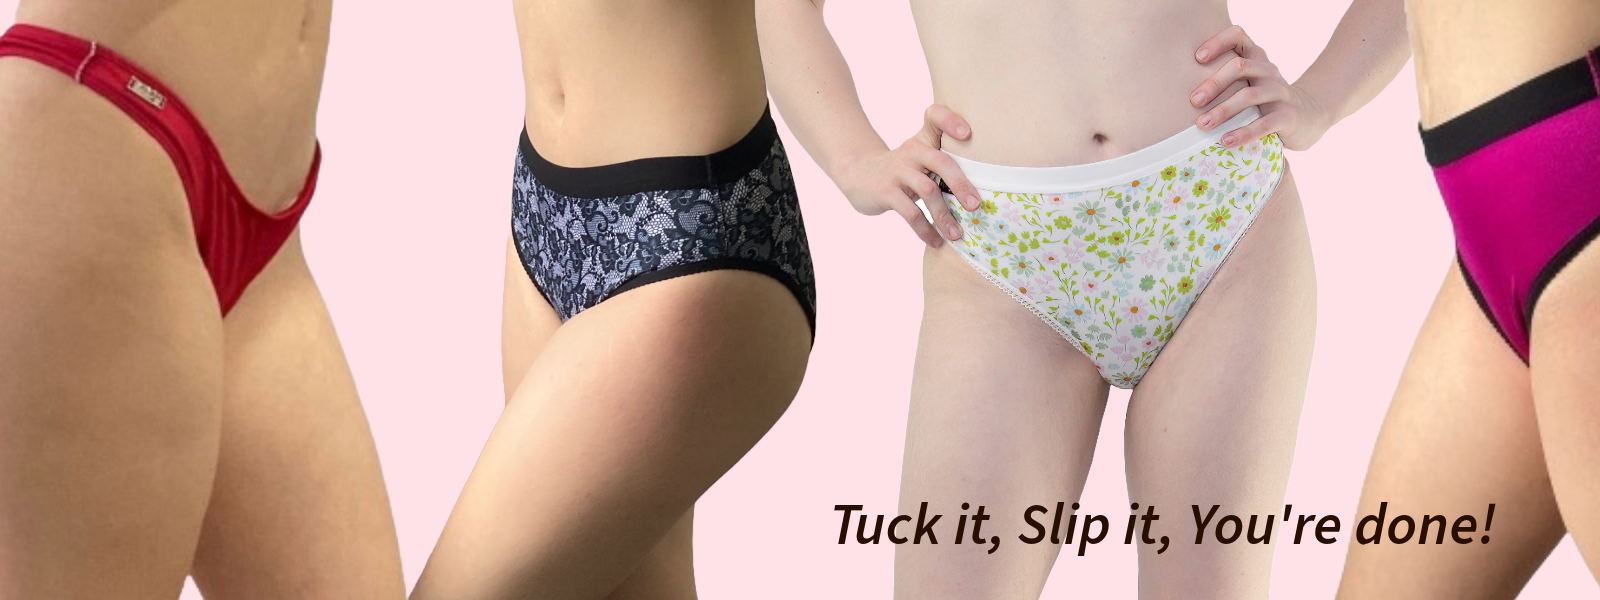 Tucking, made easy. Tuck it. Slip , it. You're done.